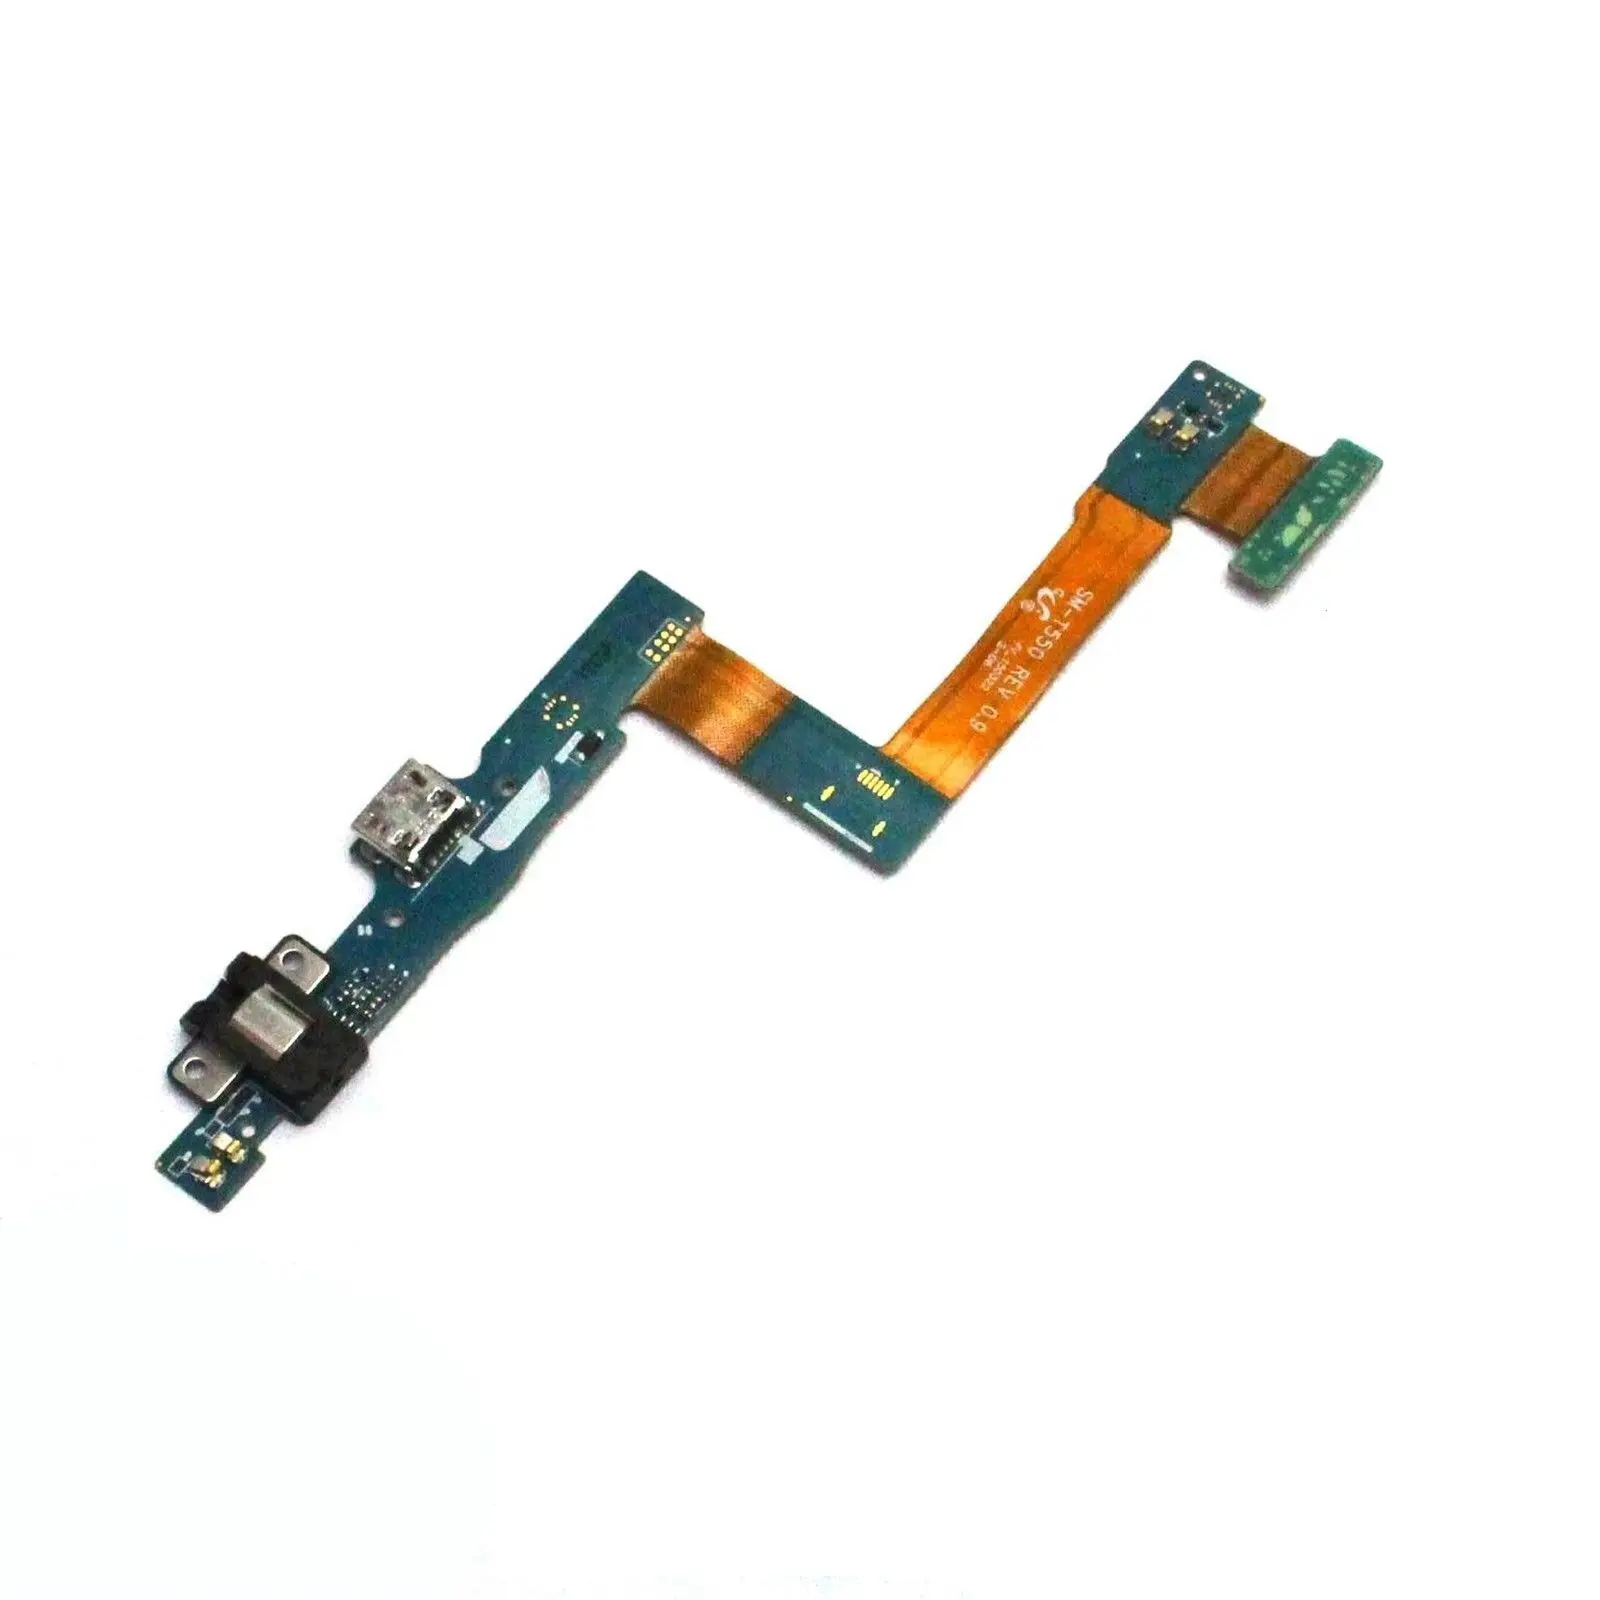 NuFix Replacement for Samsung Galaxy Tab A 9.7 Charging Port Flex Connector Board Module PCB Part Dock Connector USB Cable for Samsung Galaxy Tab A 9.7 SM-T550 SM-T555 T550 T555 